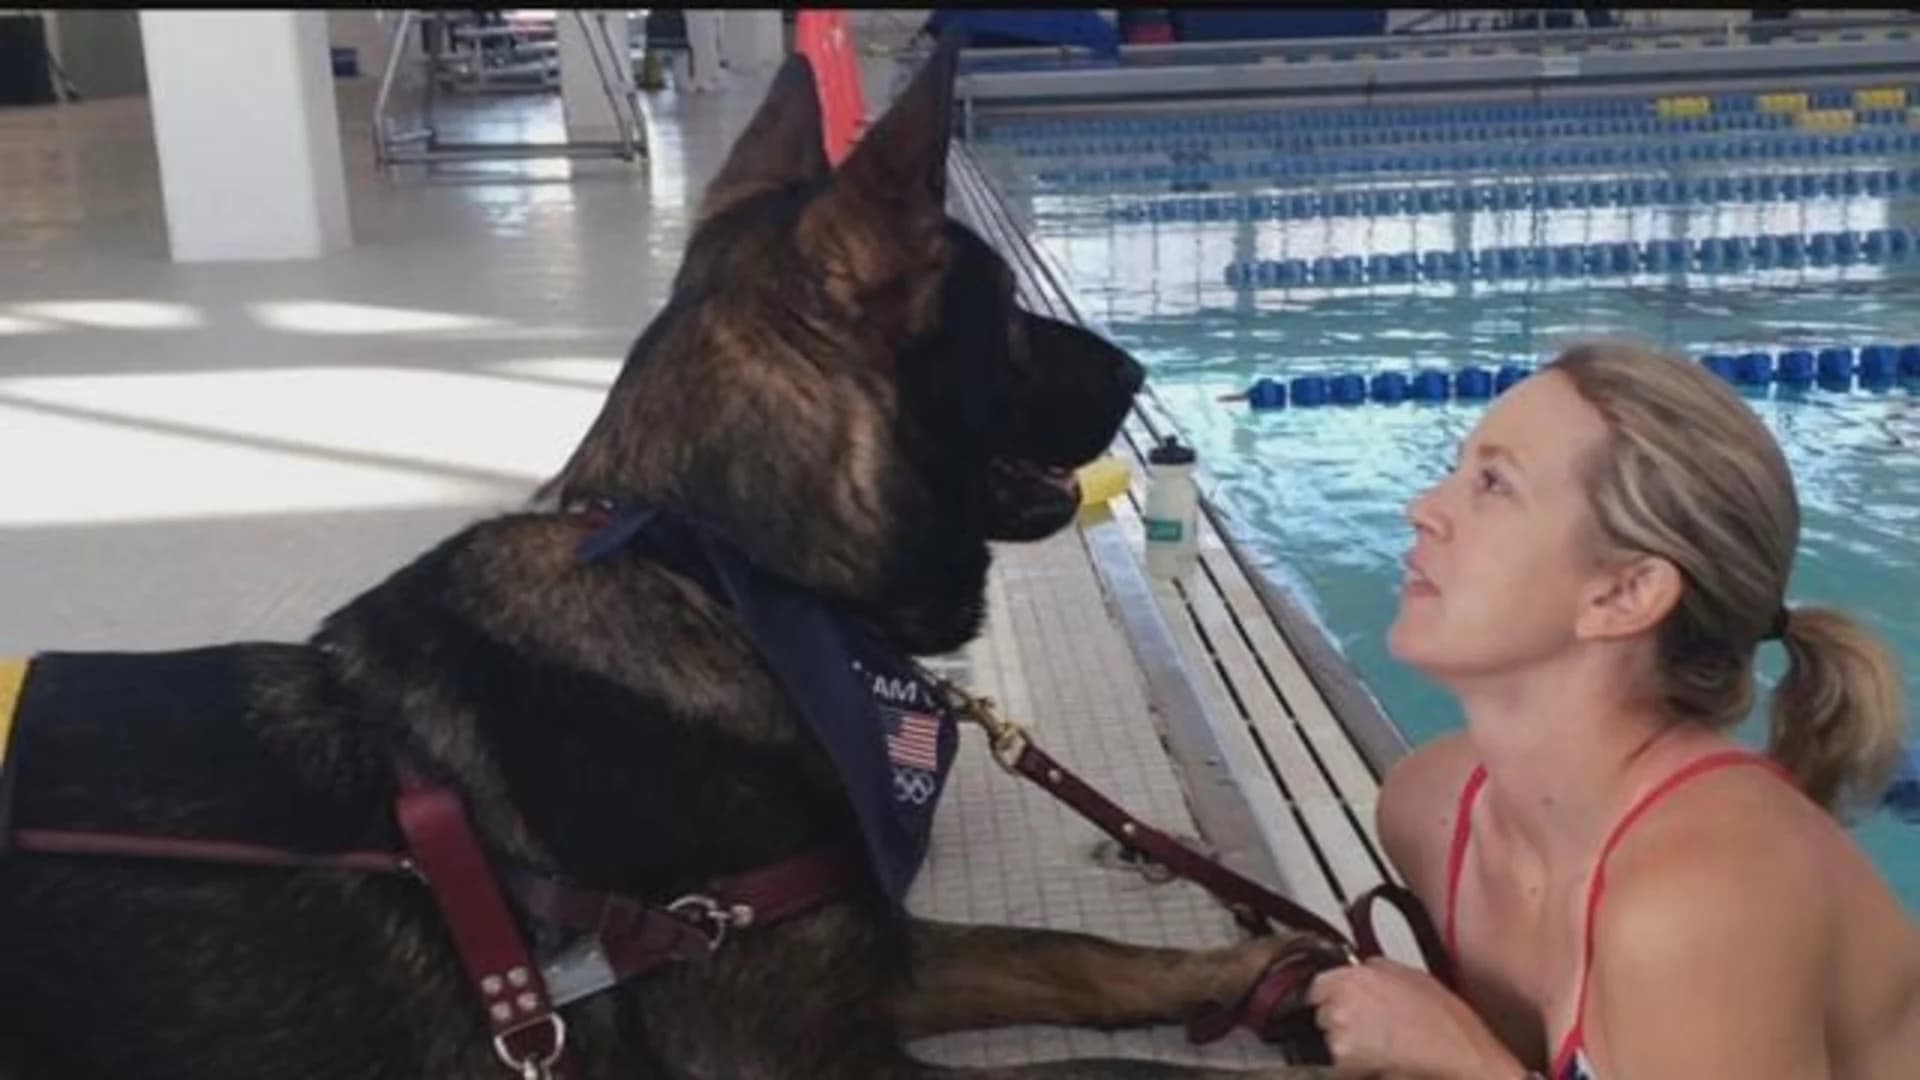 Fidelco Guide Dog Foundation provides lifeline to those who can’t see